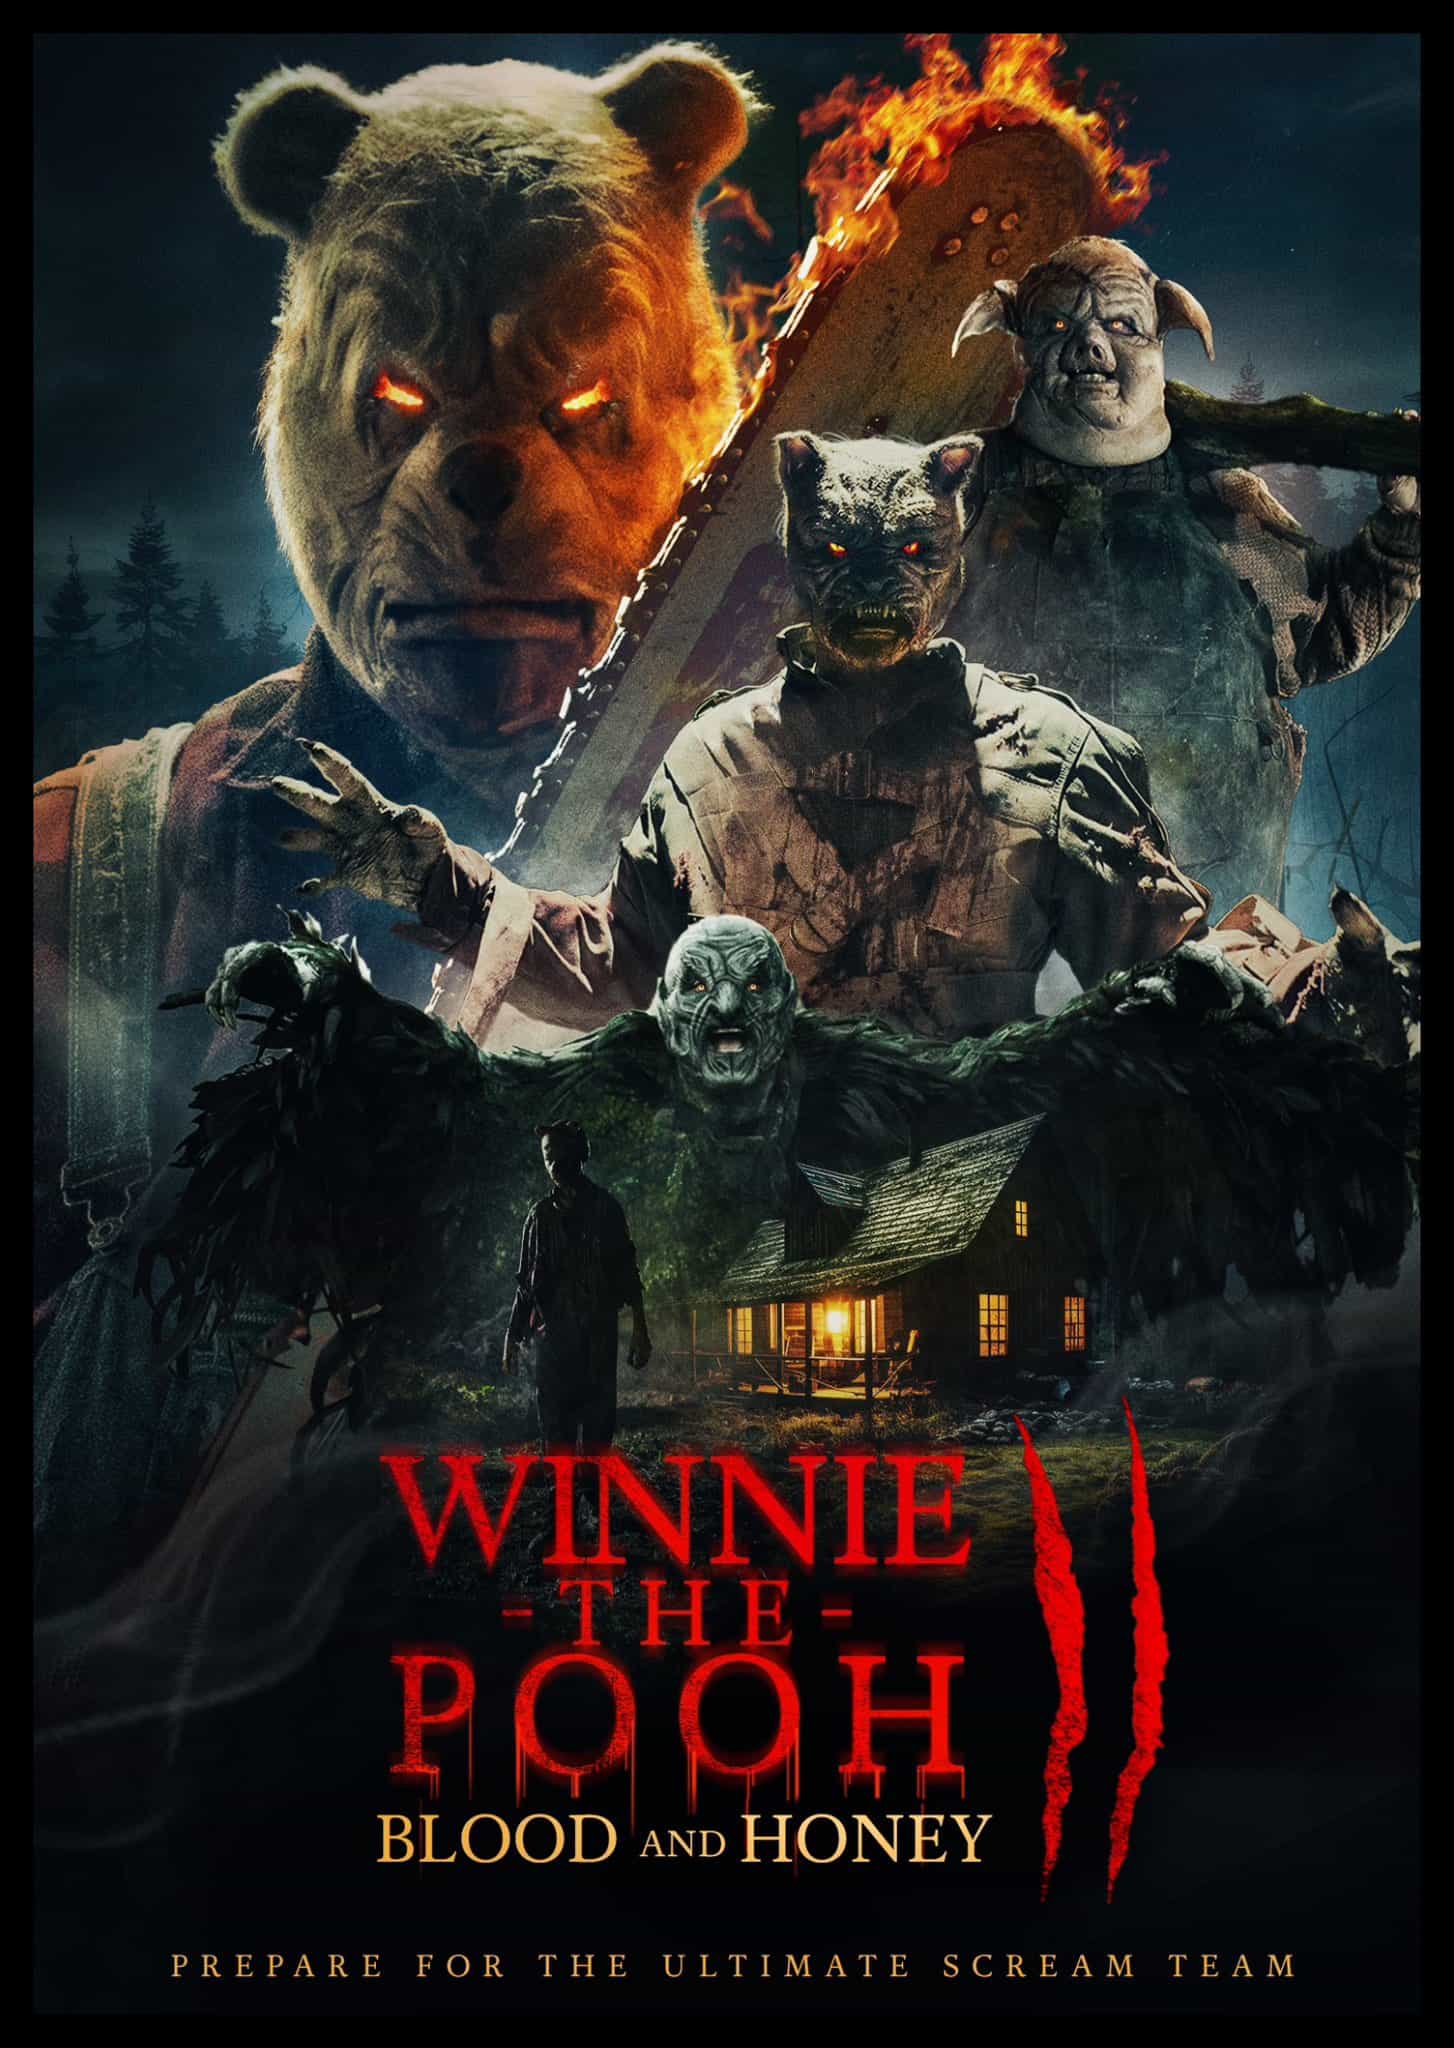 Winnie-the-Pooh: Blood and Honey 2 is given an 18 age rating in the UK for strong bloody violence, injury detail, threat